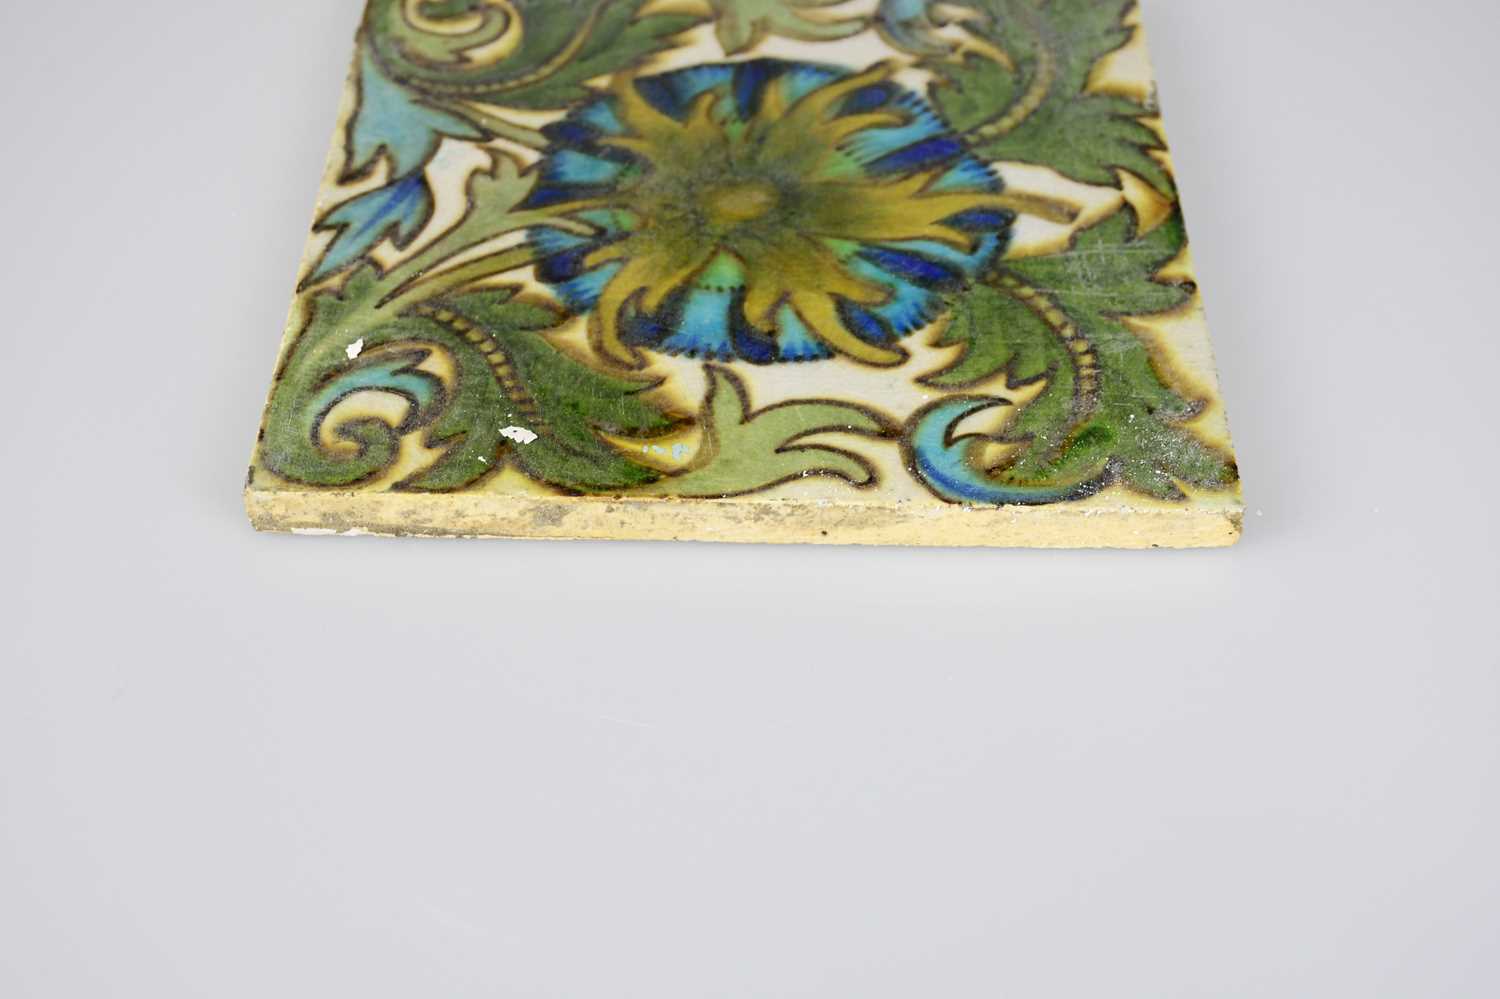 ATTRIBUTED TO MAW & CO; an Art Pottery tile painted with floral decoration, in shades of green, - Image 6 of 6